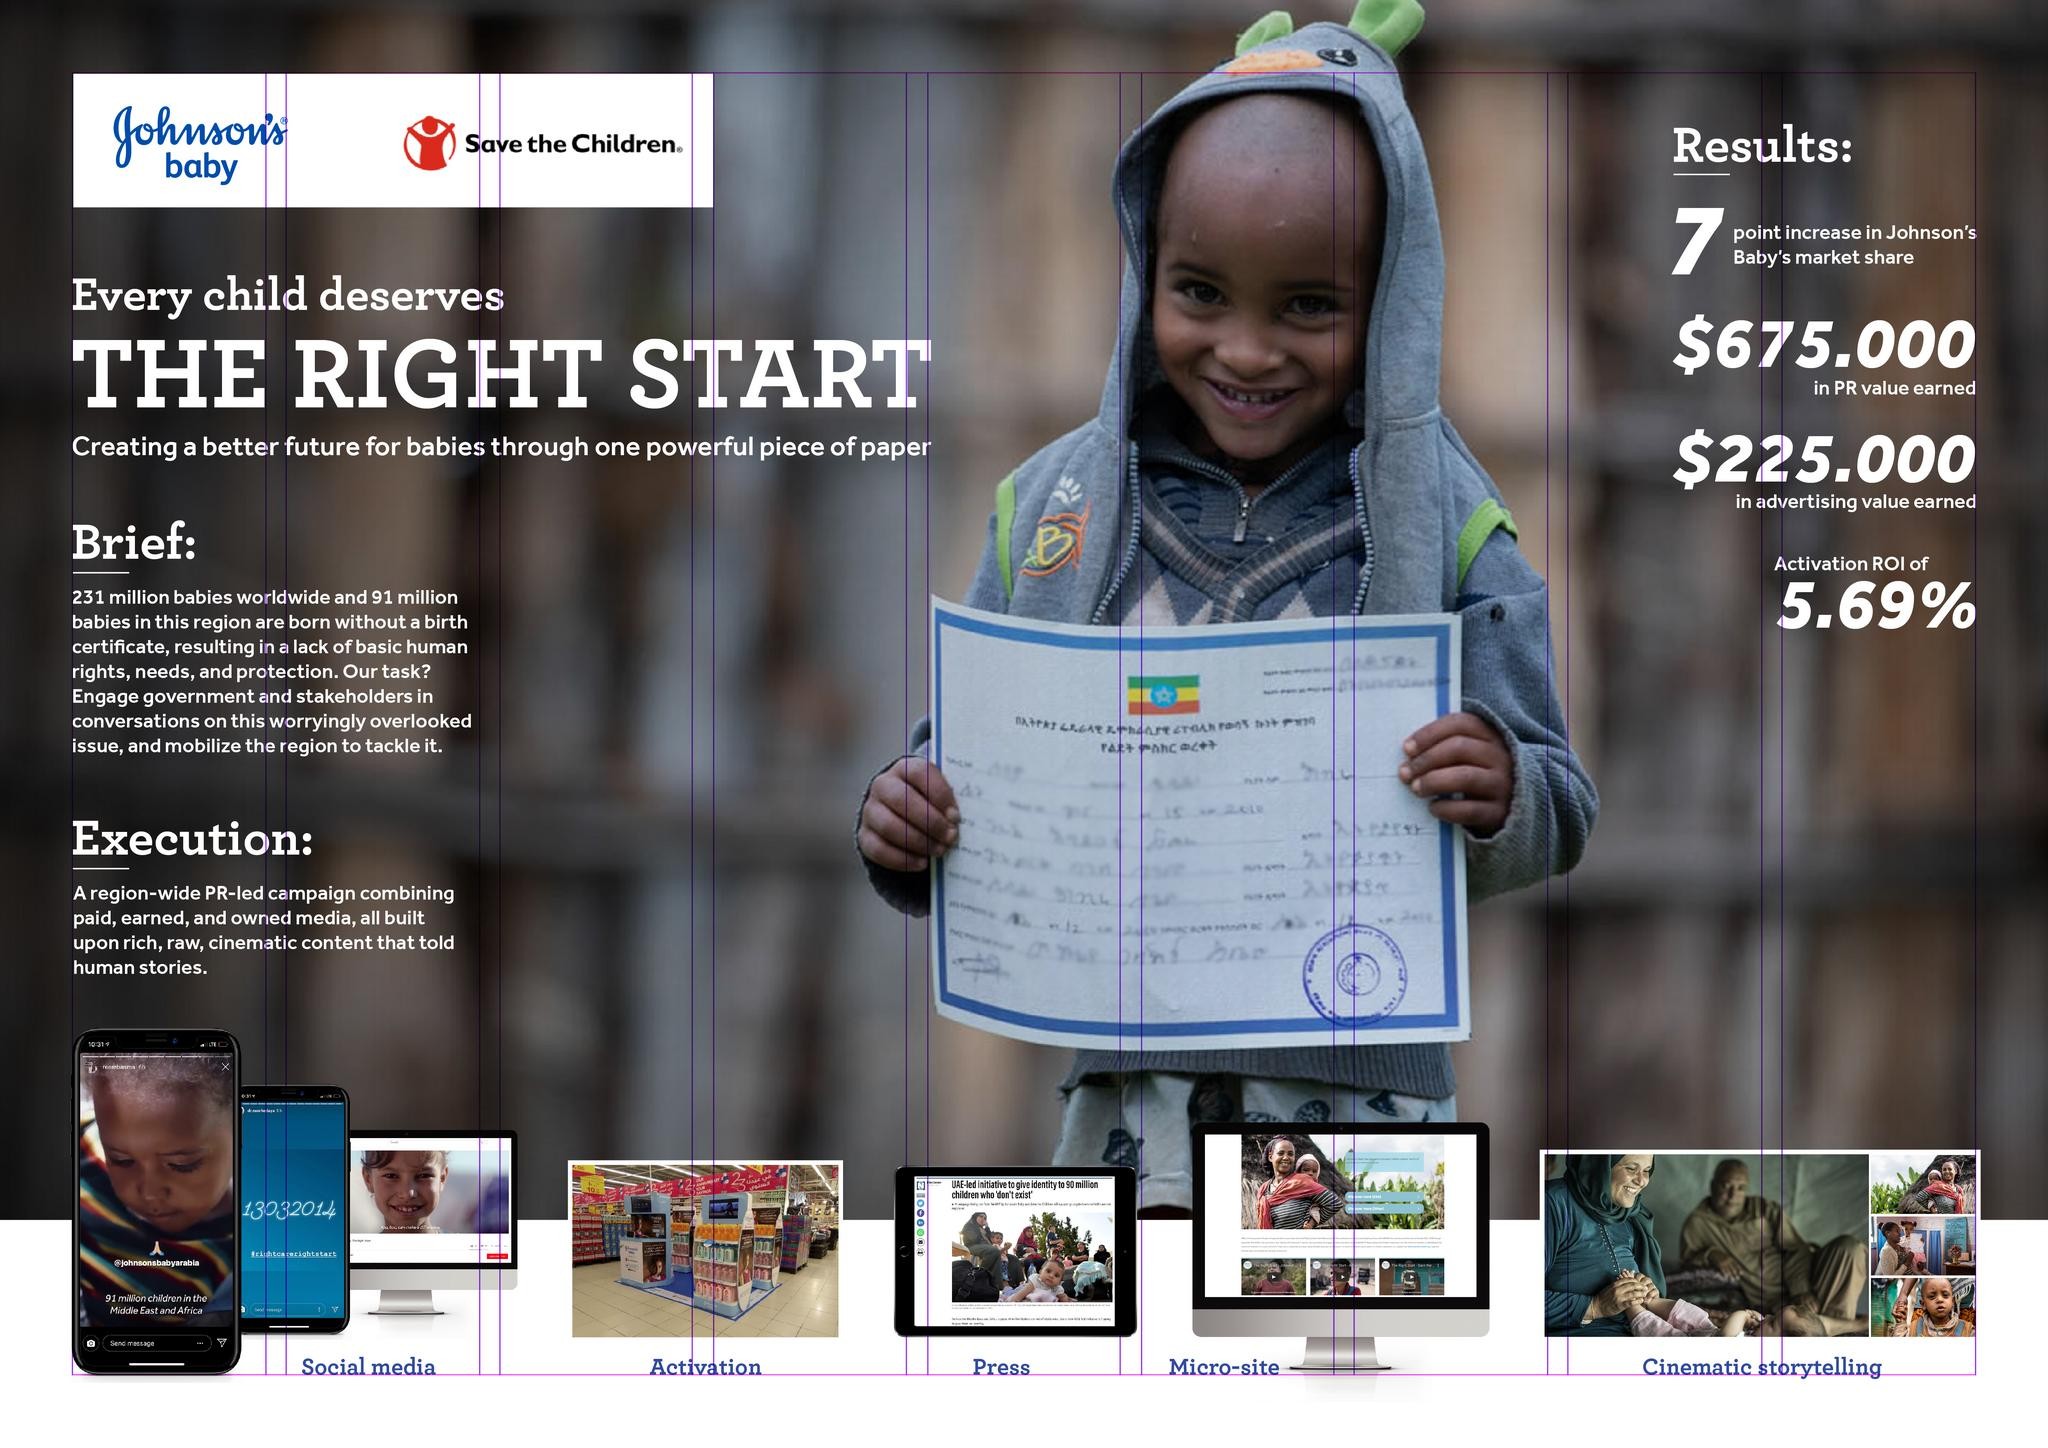 The Right Start Initiative